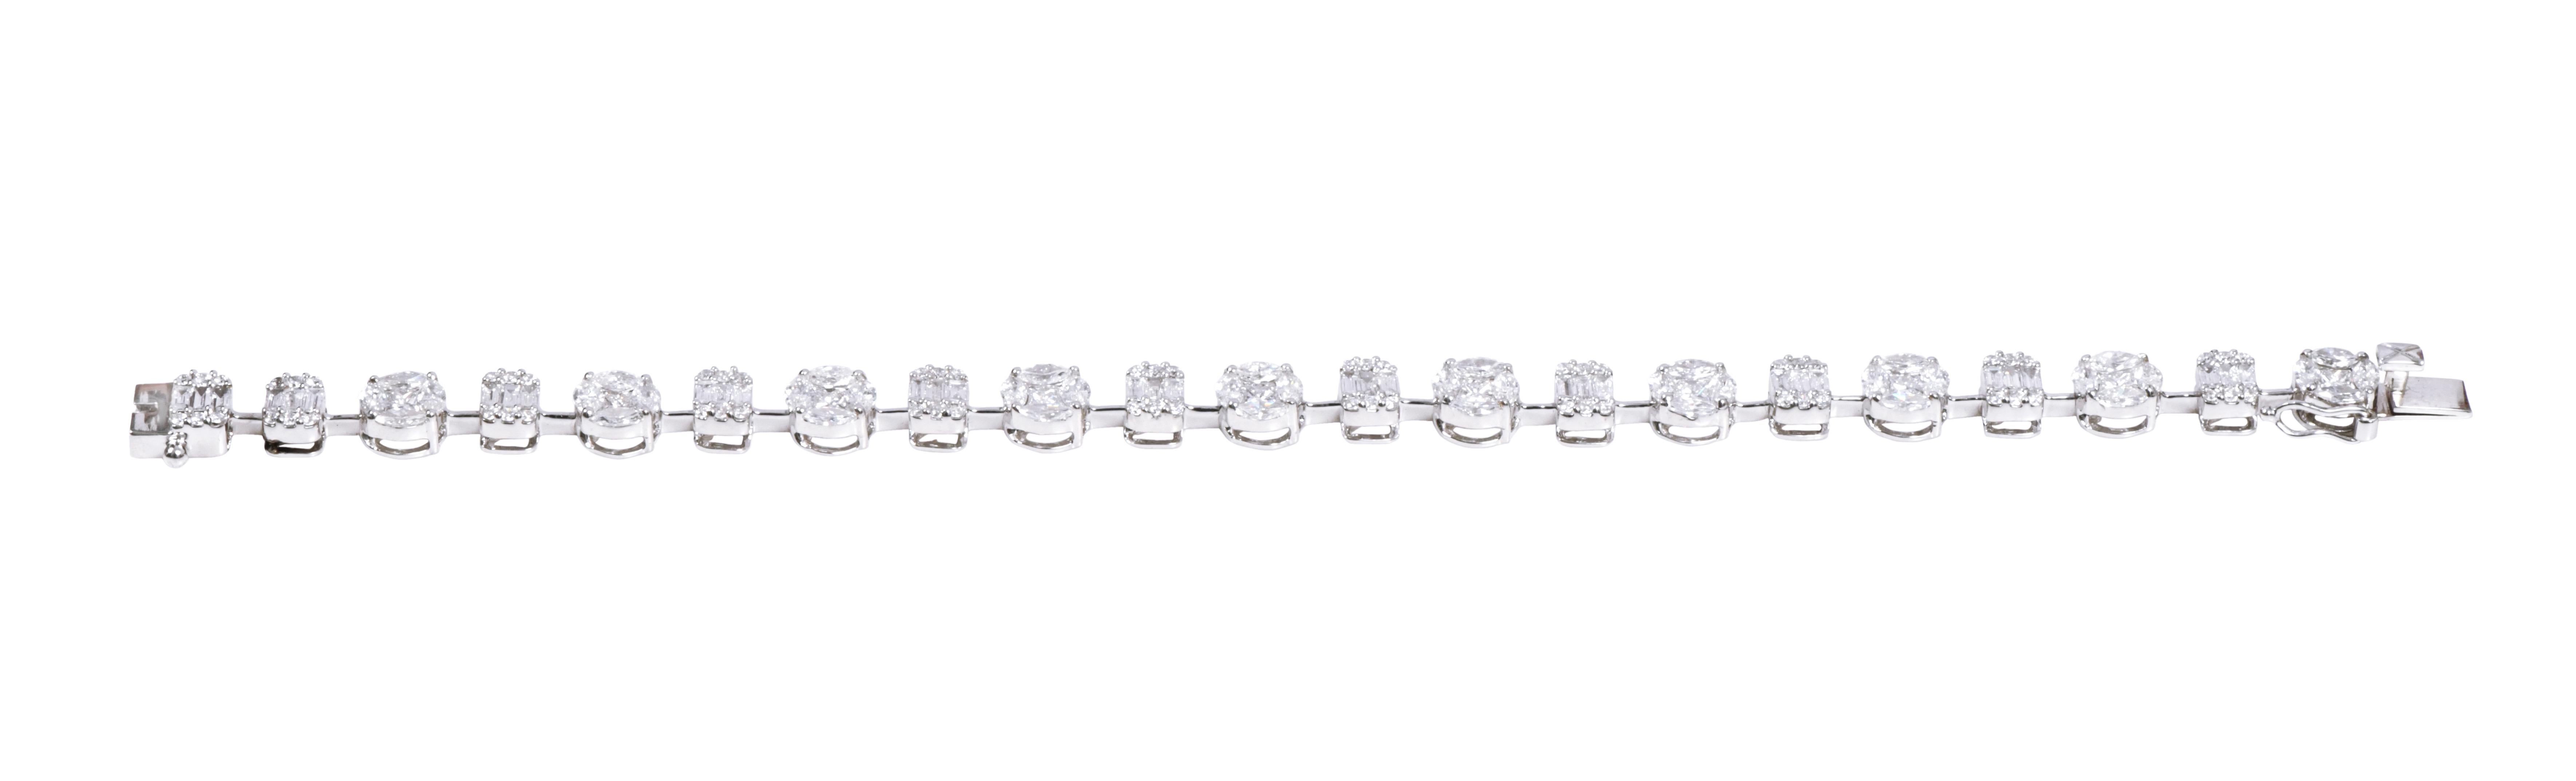 18 Karat White Gold 5.20 Carat Diamond Tennis Bracelet

We present to you a striking and heavenly design with a classic edge. The best in class and luxurious diamonds that are crafted to form a one-of-a-kind and timeless design. The amalgamation of